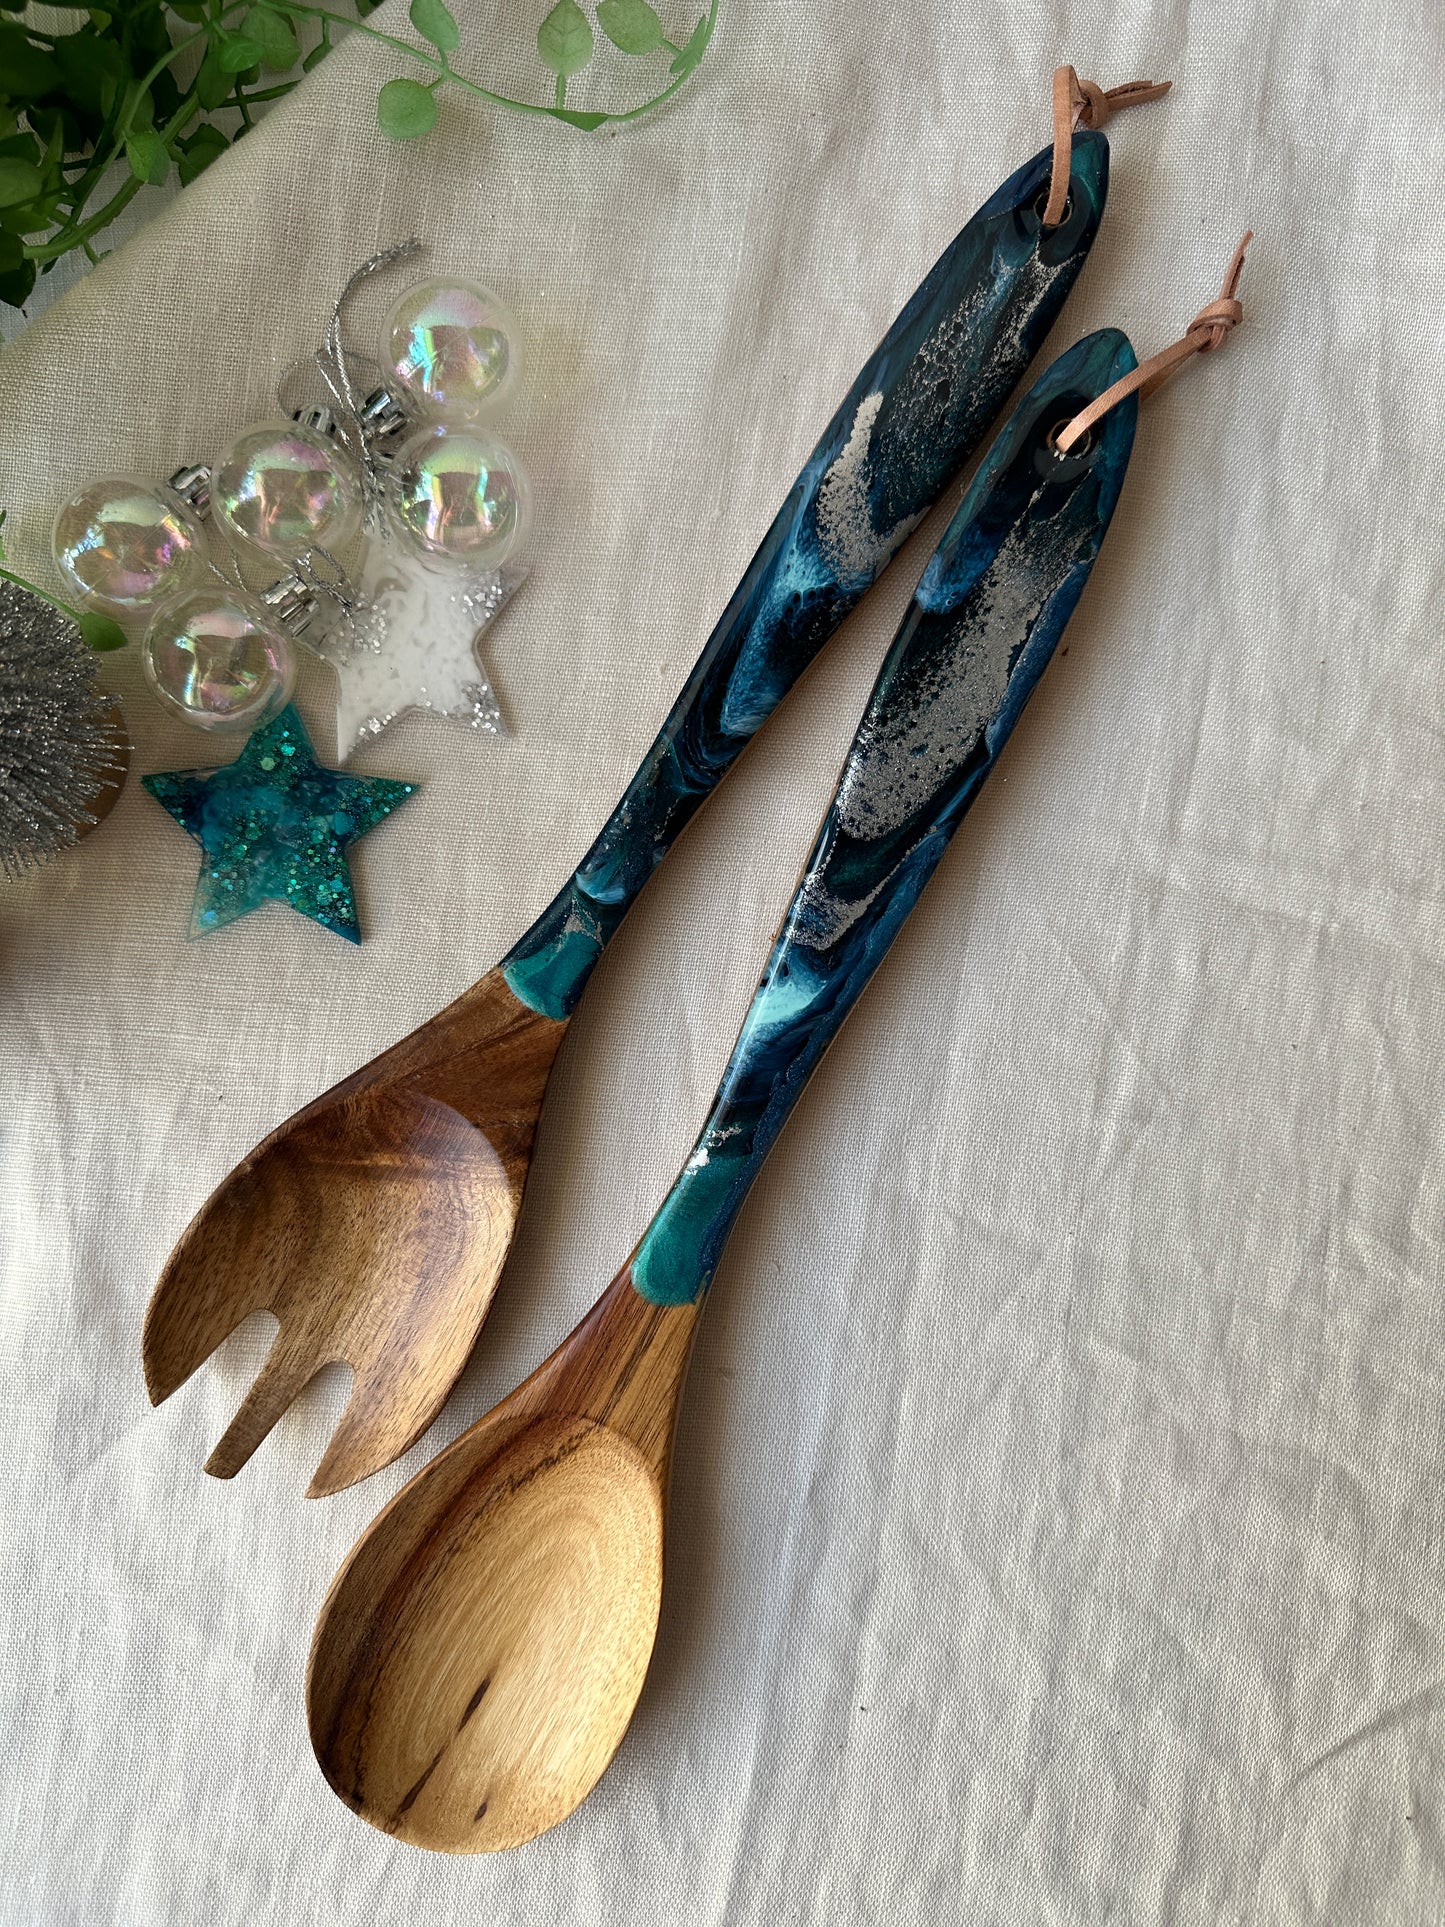 SALAD SERVERS - navy, teal and silver